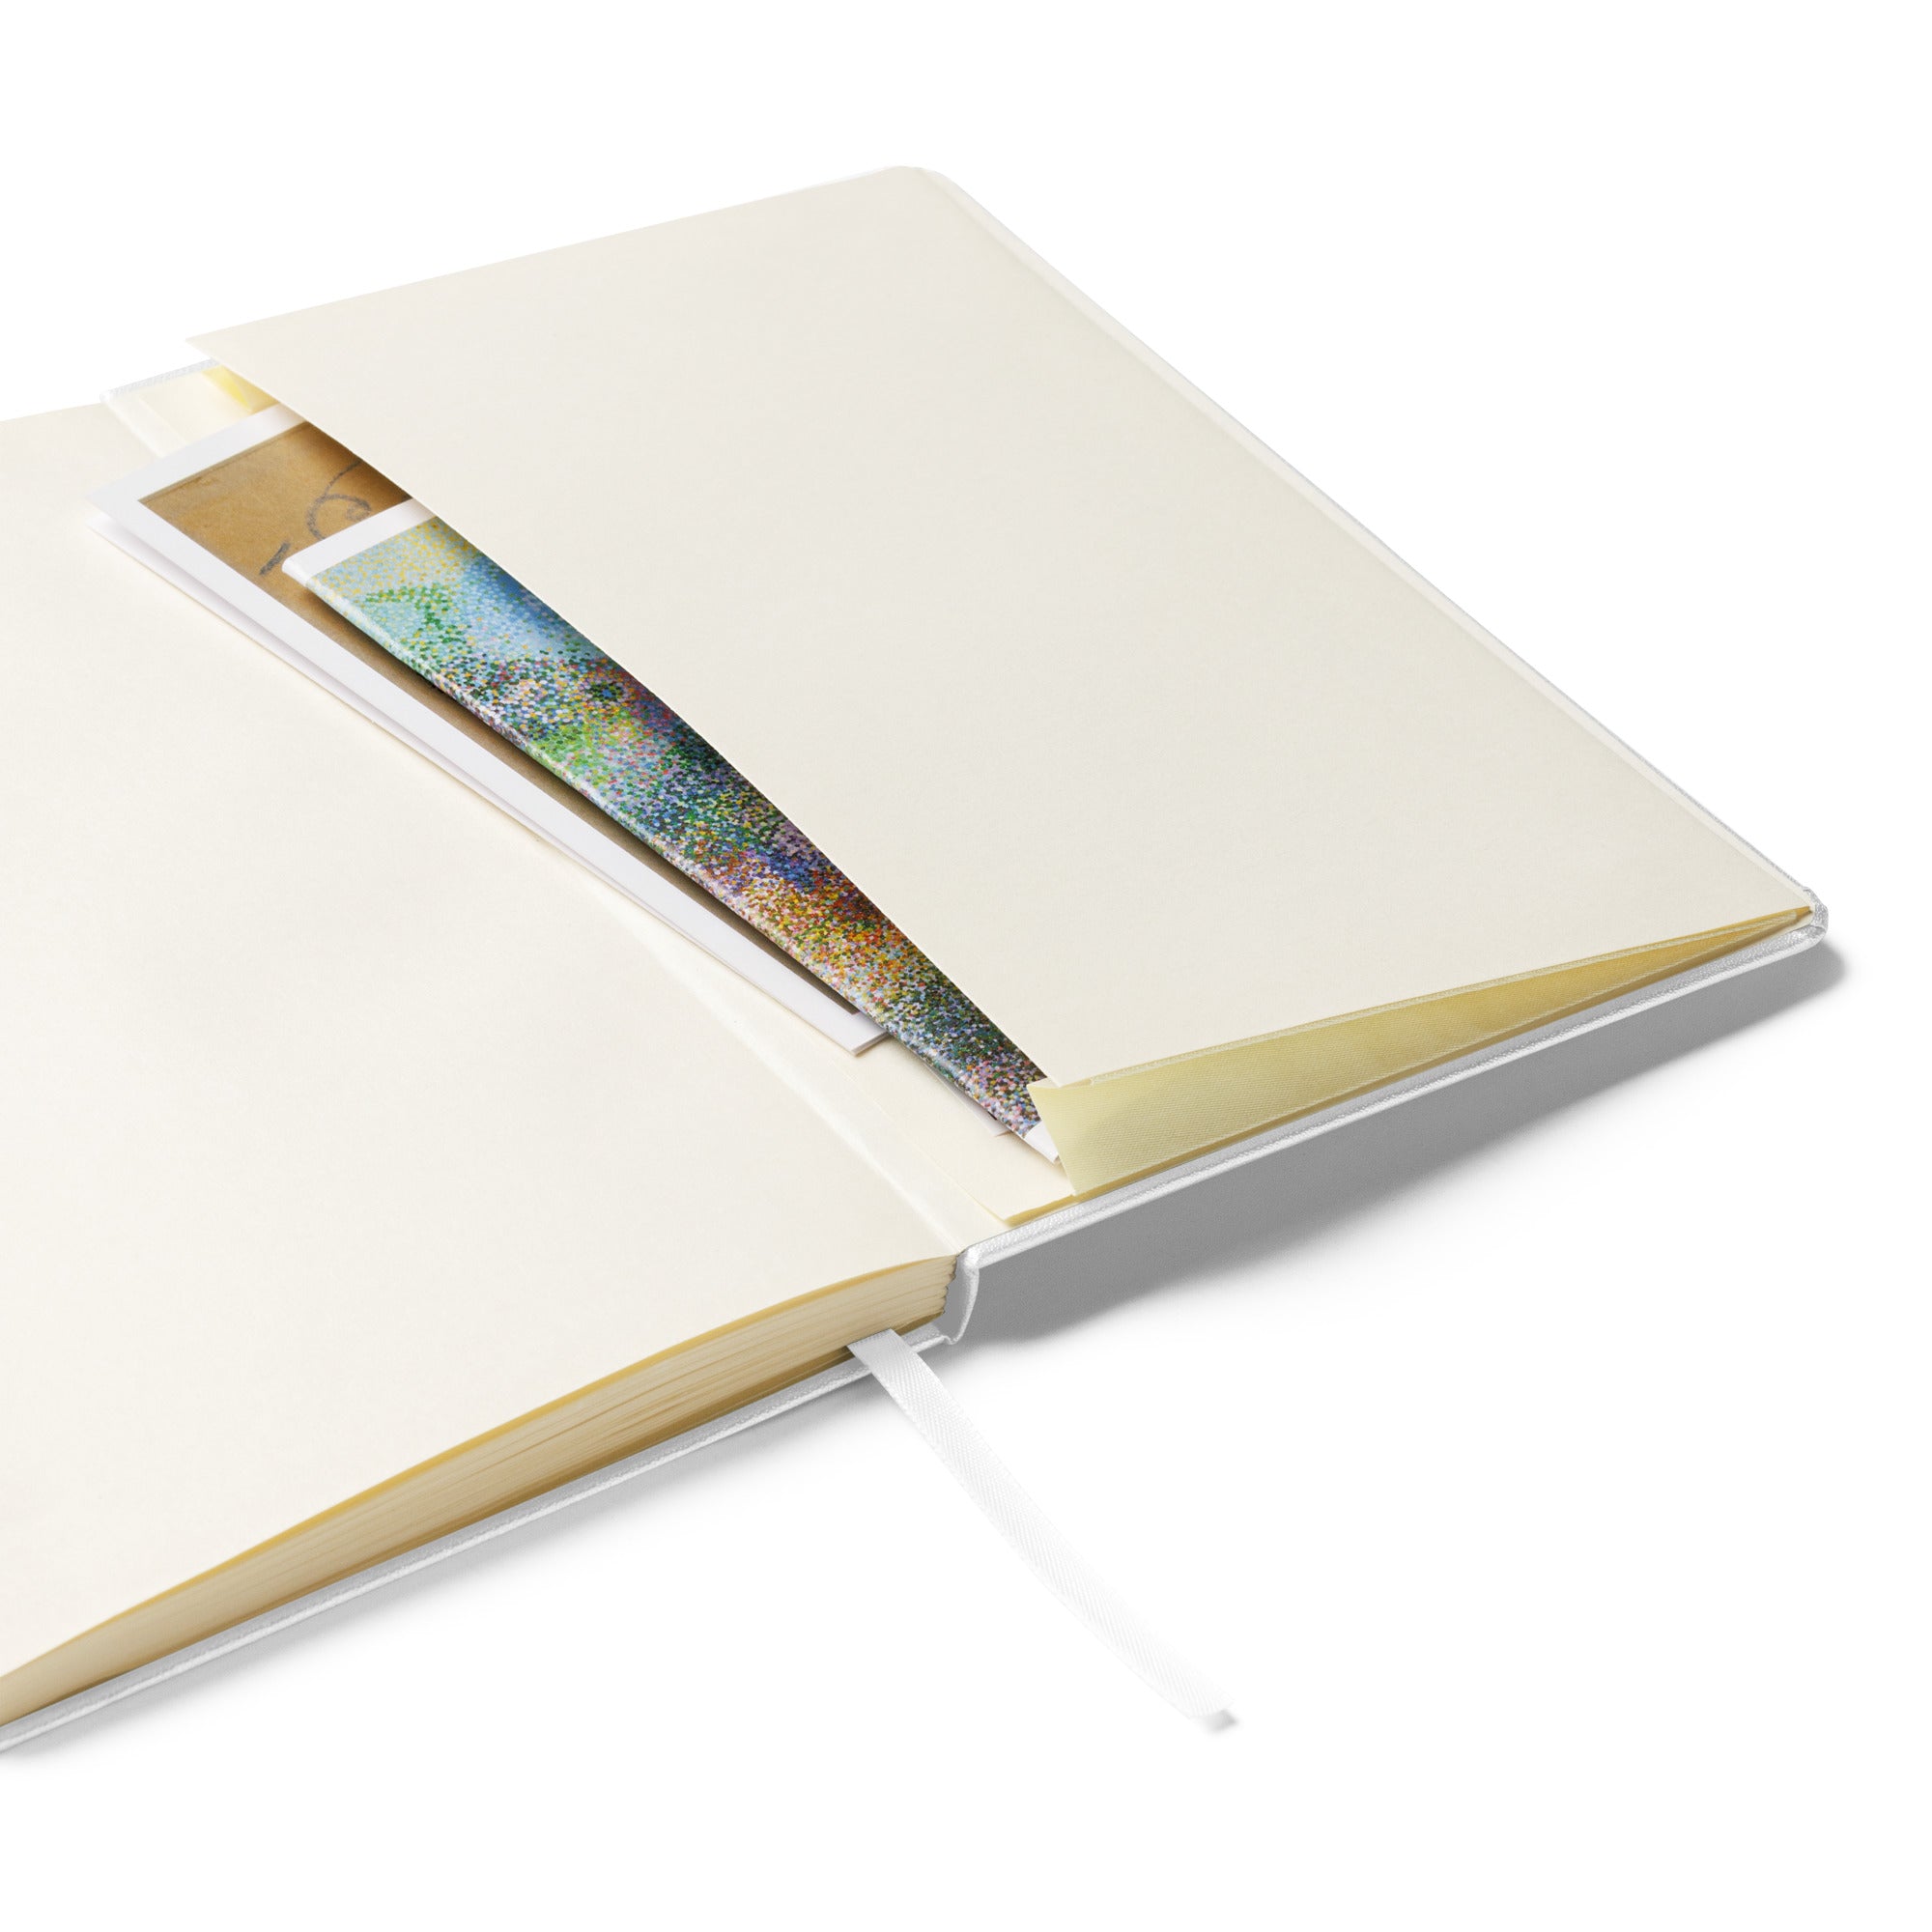 Life Within Death Hardcover Bound Notebook